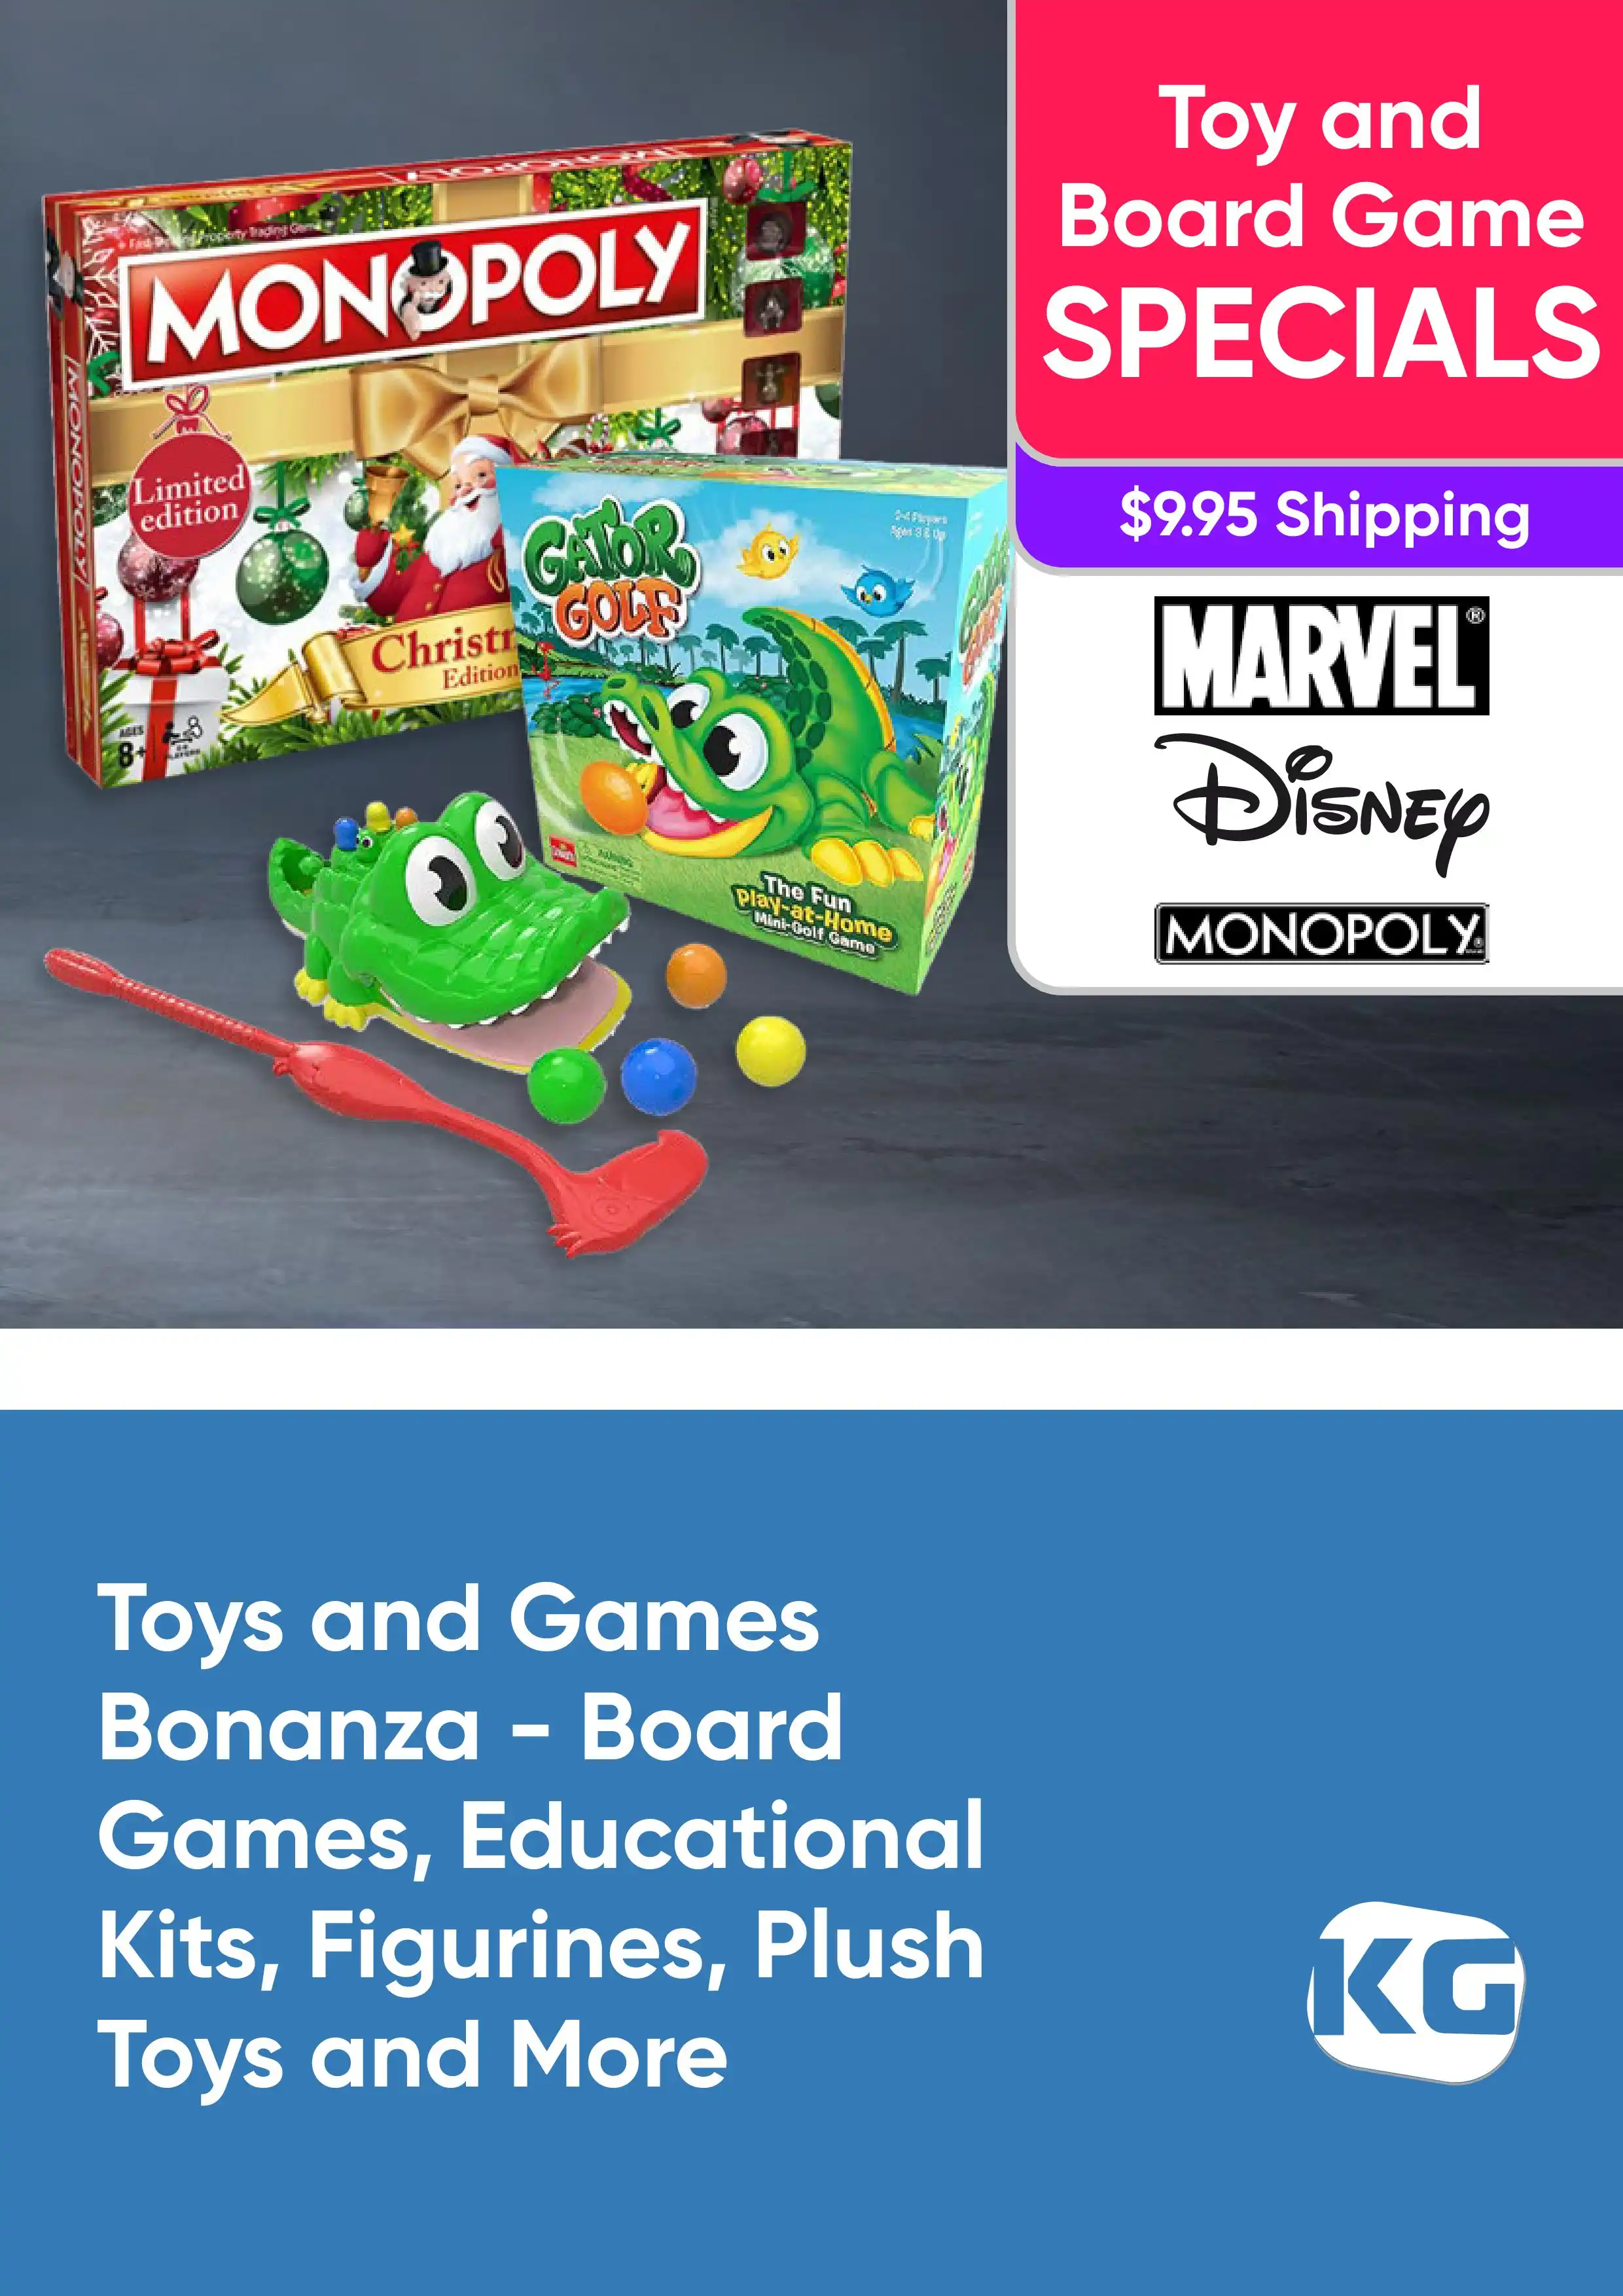 Toys and Games Bonanza - Board Games, Educational Kits, Figurines, Plush Toys and More